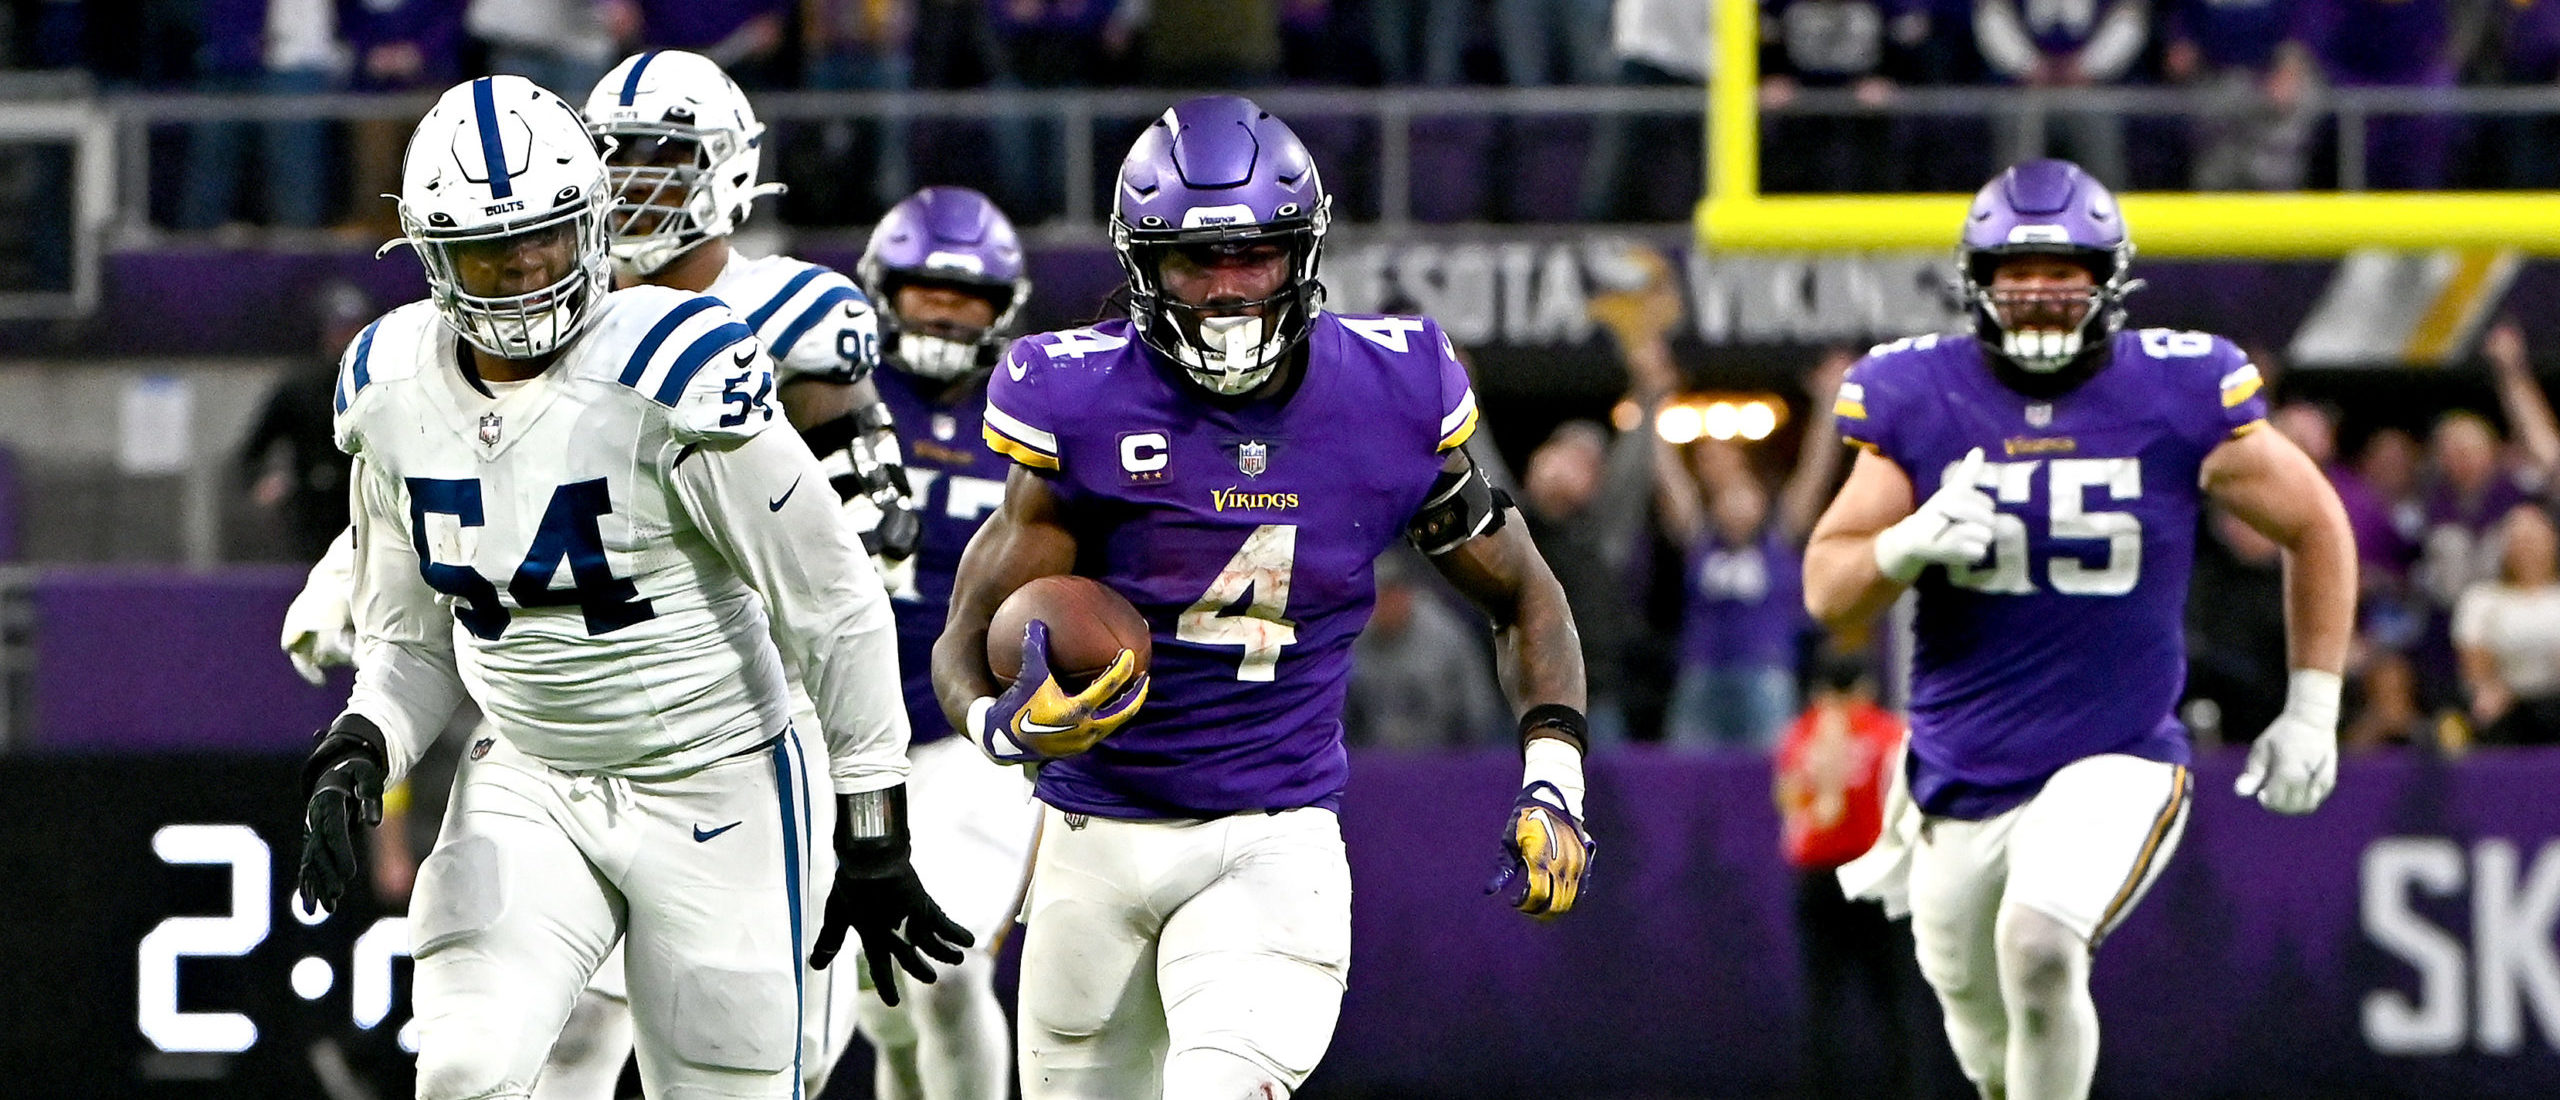 Saturday Early Afternoon Football: Indianapolis Colts @ Minnesota Vikings  Live Thread & Game Information - The Phinsider